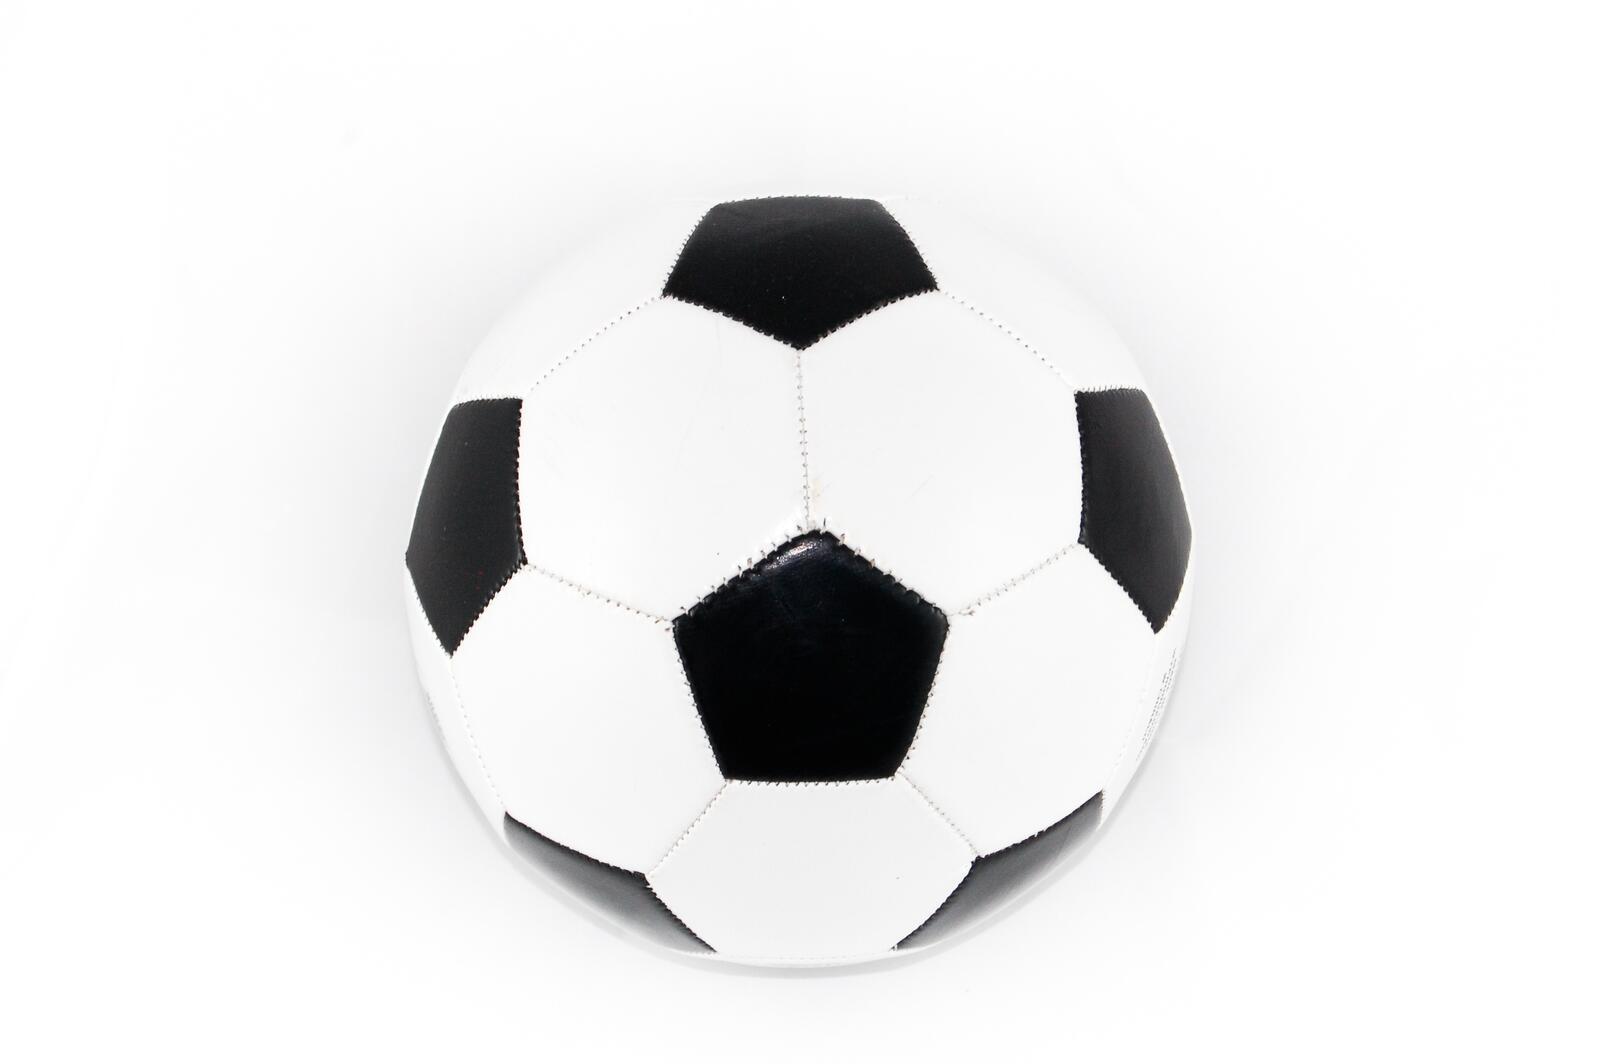 Wallpapers sport ball game on the desktop